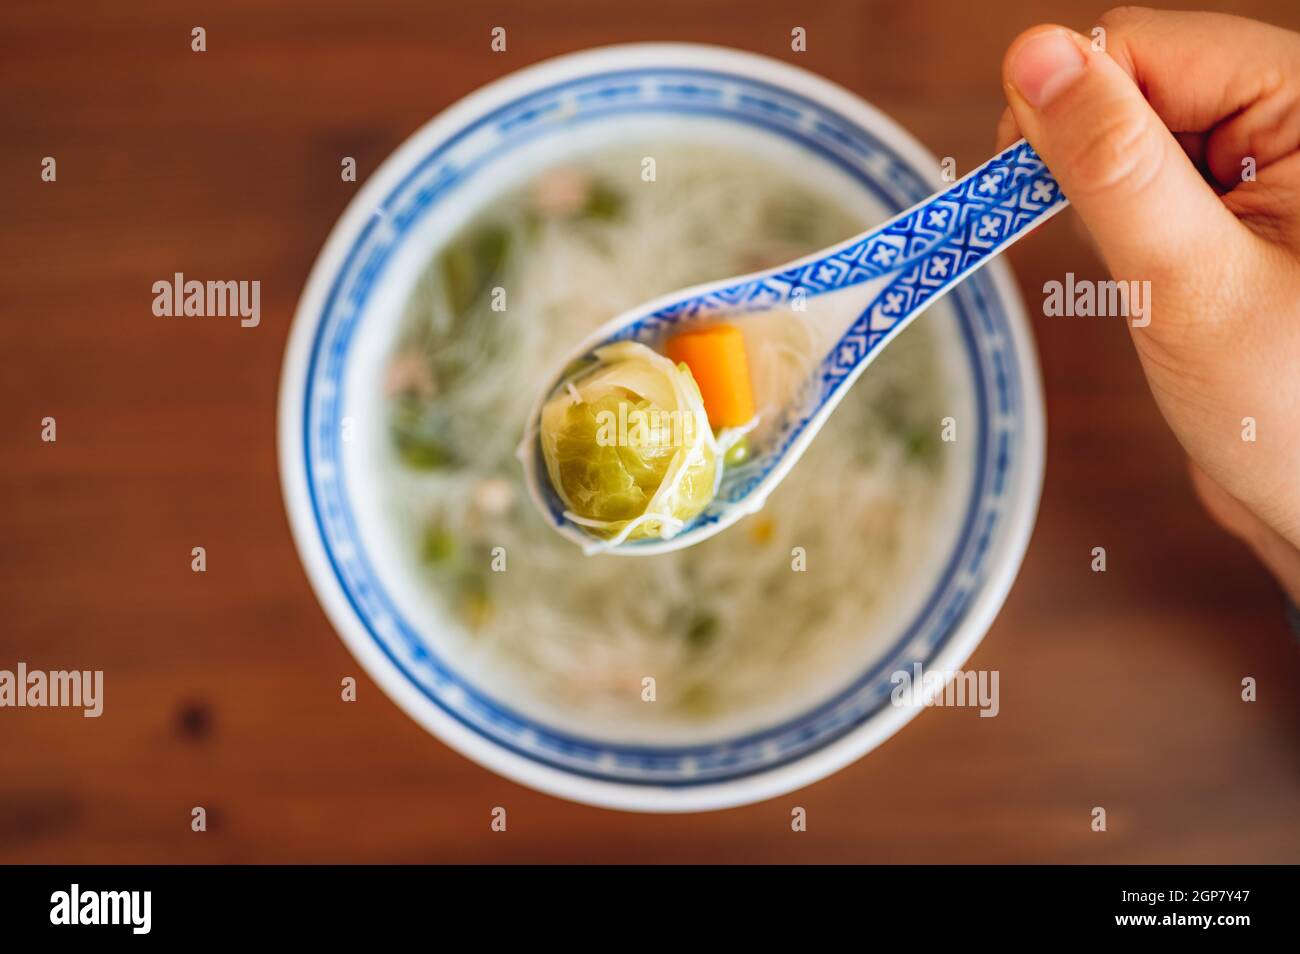 Top down view of a bowl of soup and a hand holding a spoon with cabbage and carrots and noodles. Stock Photo